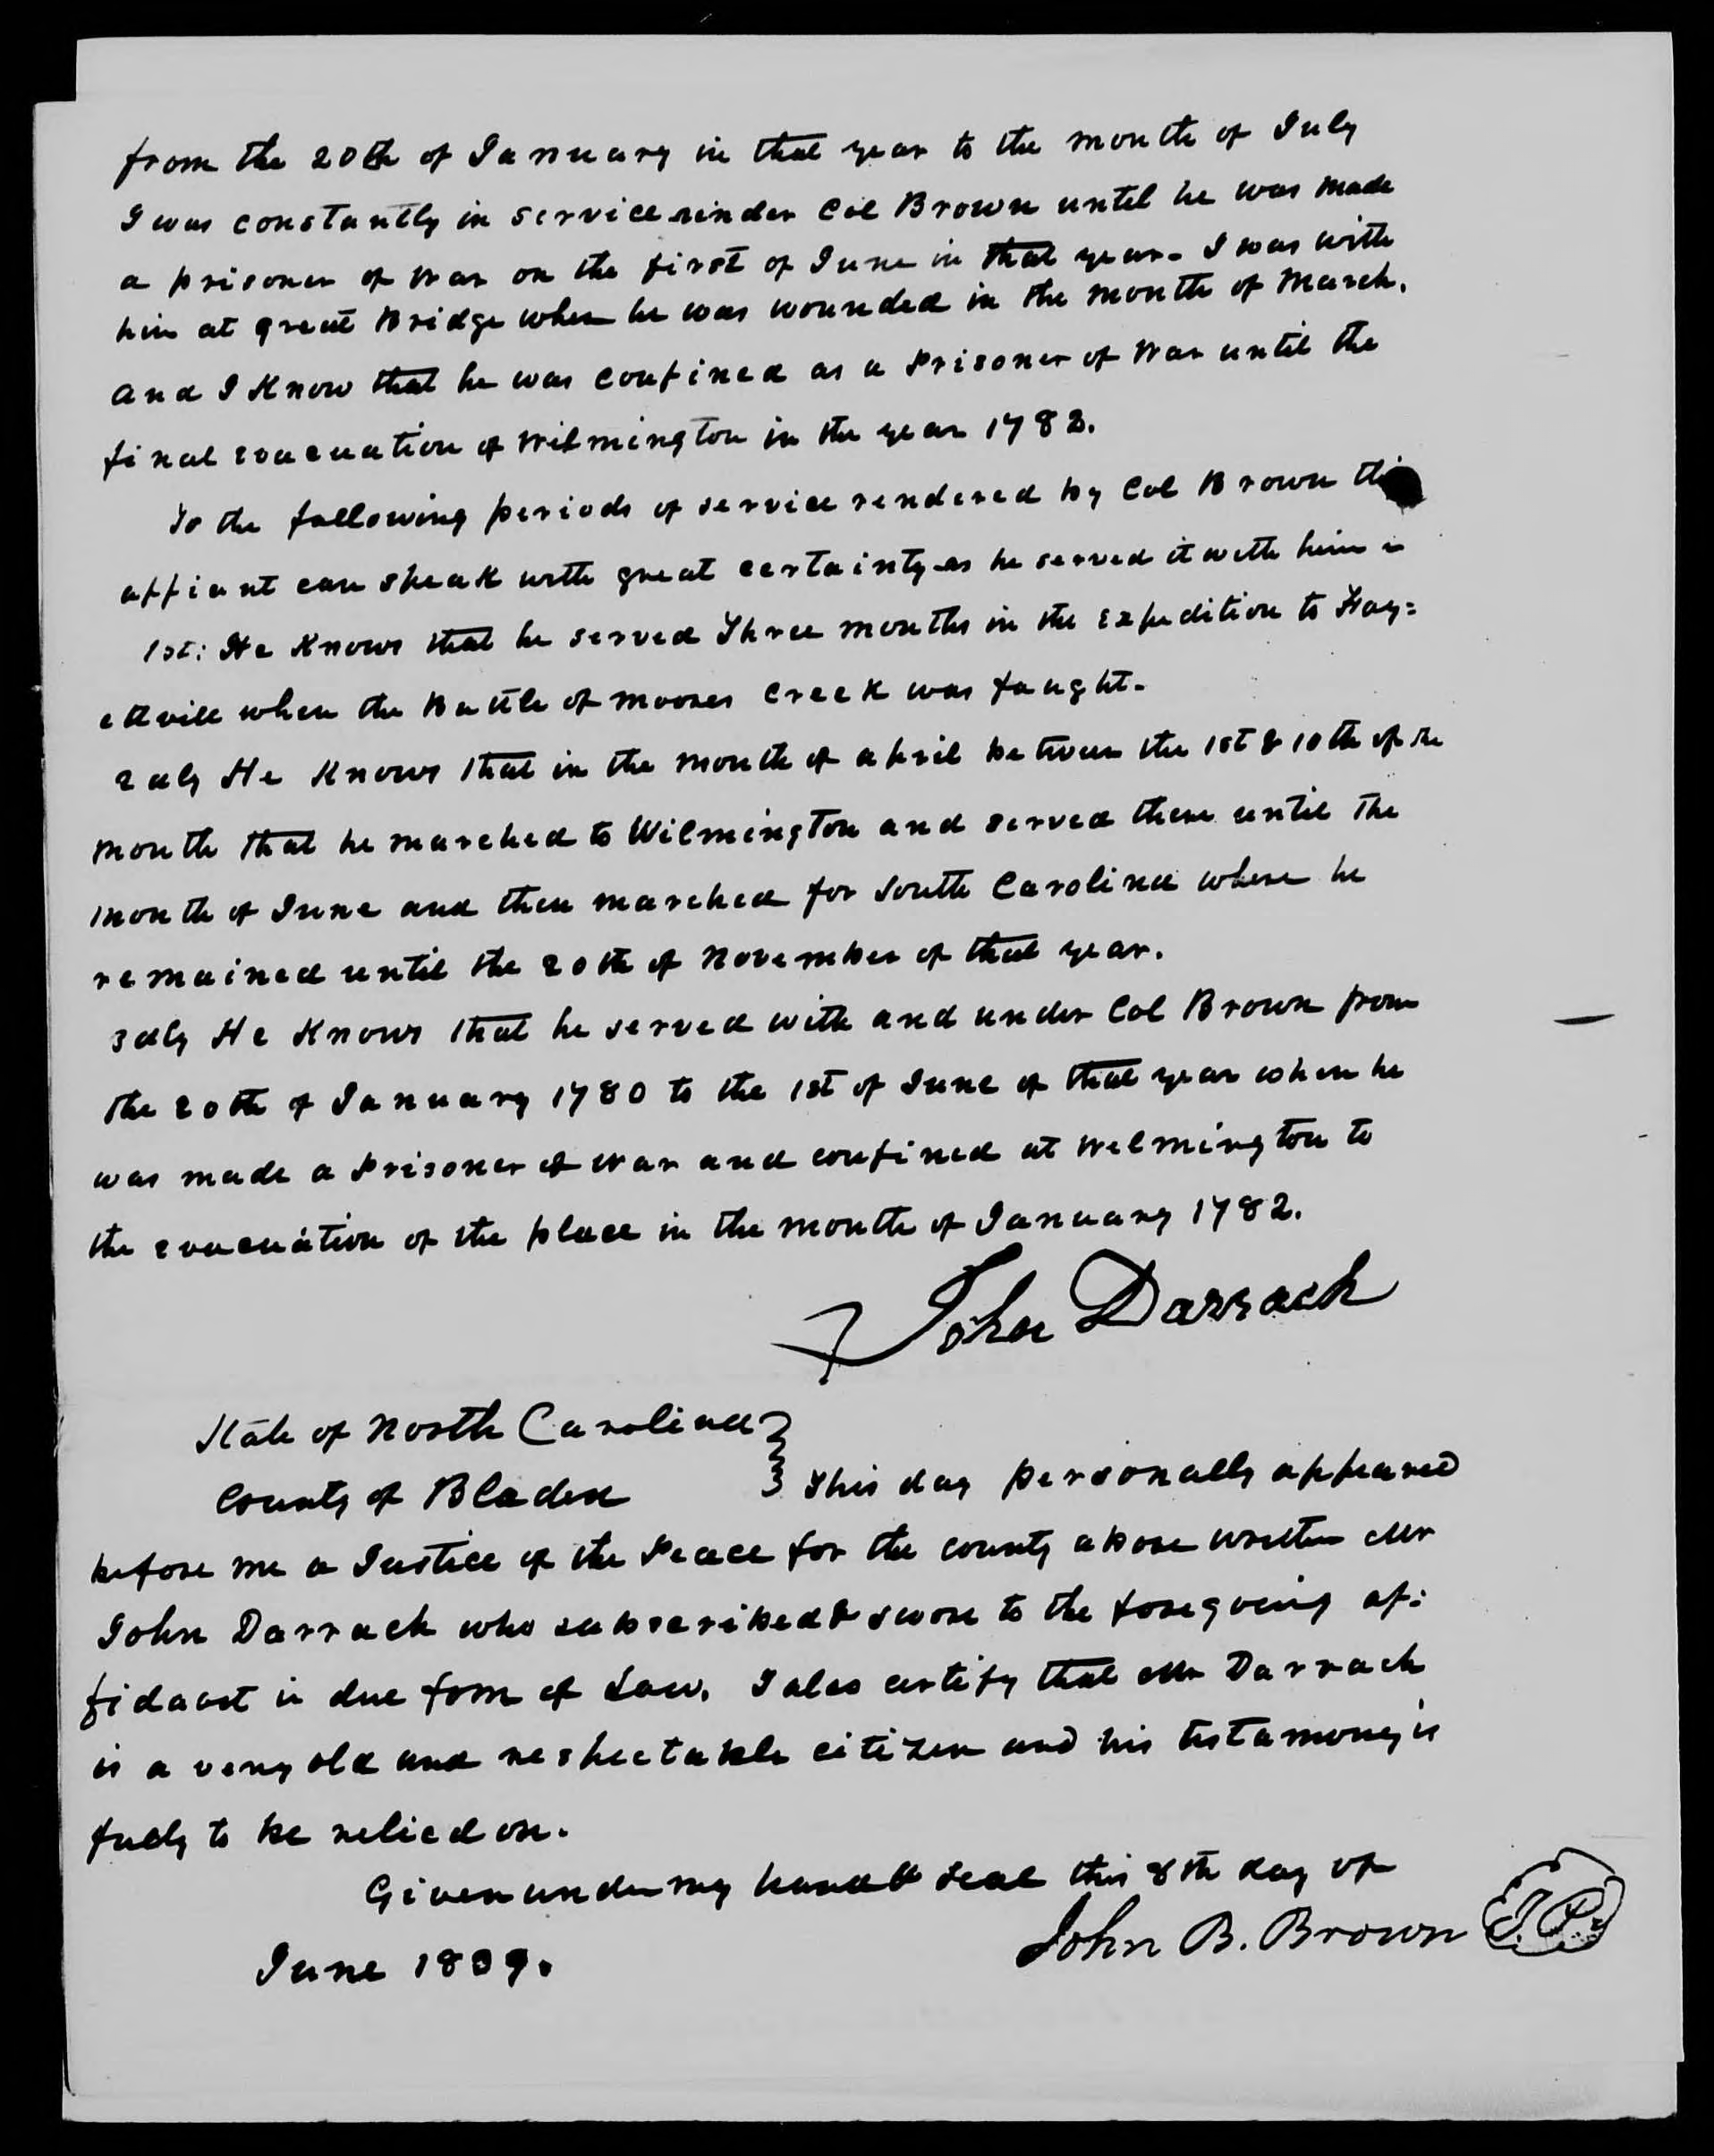 Affidavit of John Darrach (amended) in support of a Pension Claim for Lucy Brown, 8 June 1839, page 2